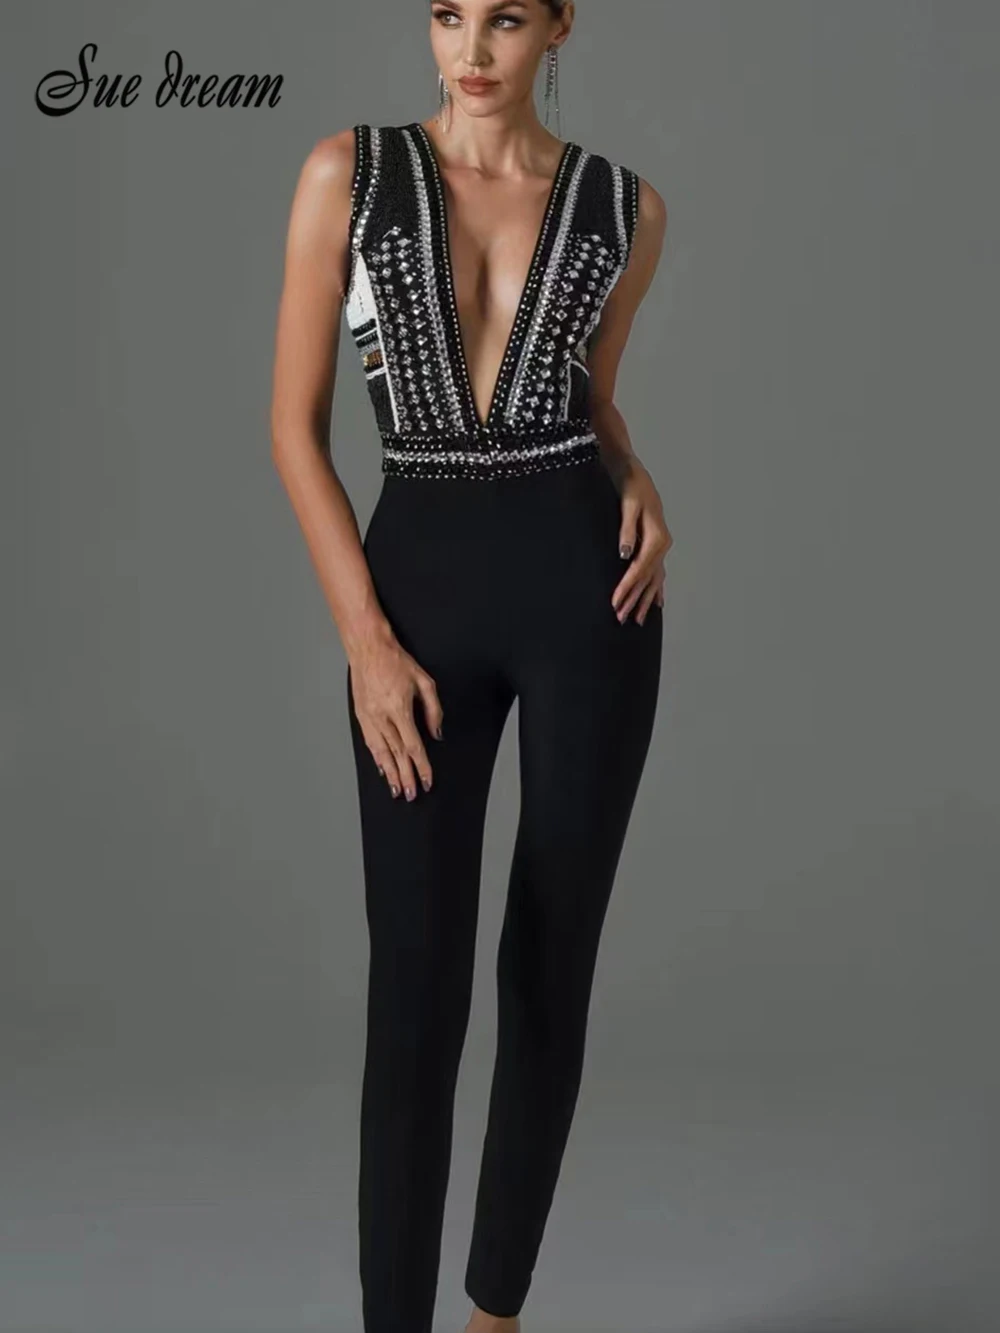 2023 Fashion Black Outwear Jumpsuits For Women Sexy Luxury Beading Sleeveless &Full Pants Club Party Rompers Jumpsuits